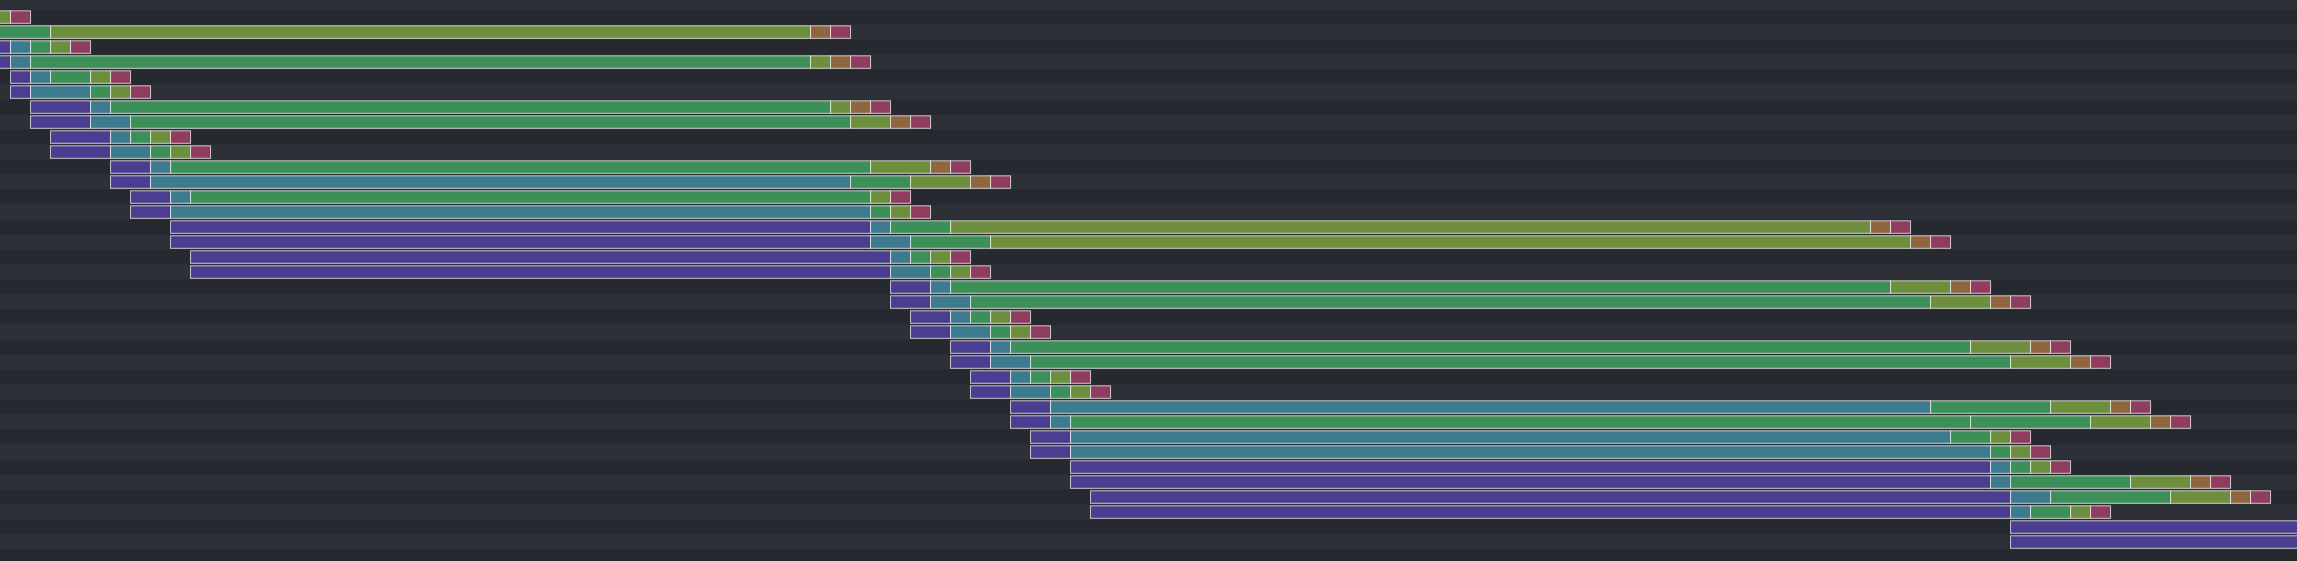 Pipeline visualization where many instructions interleave their completion times.